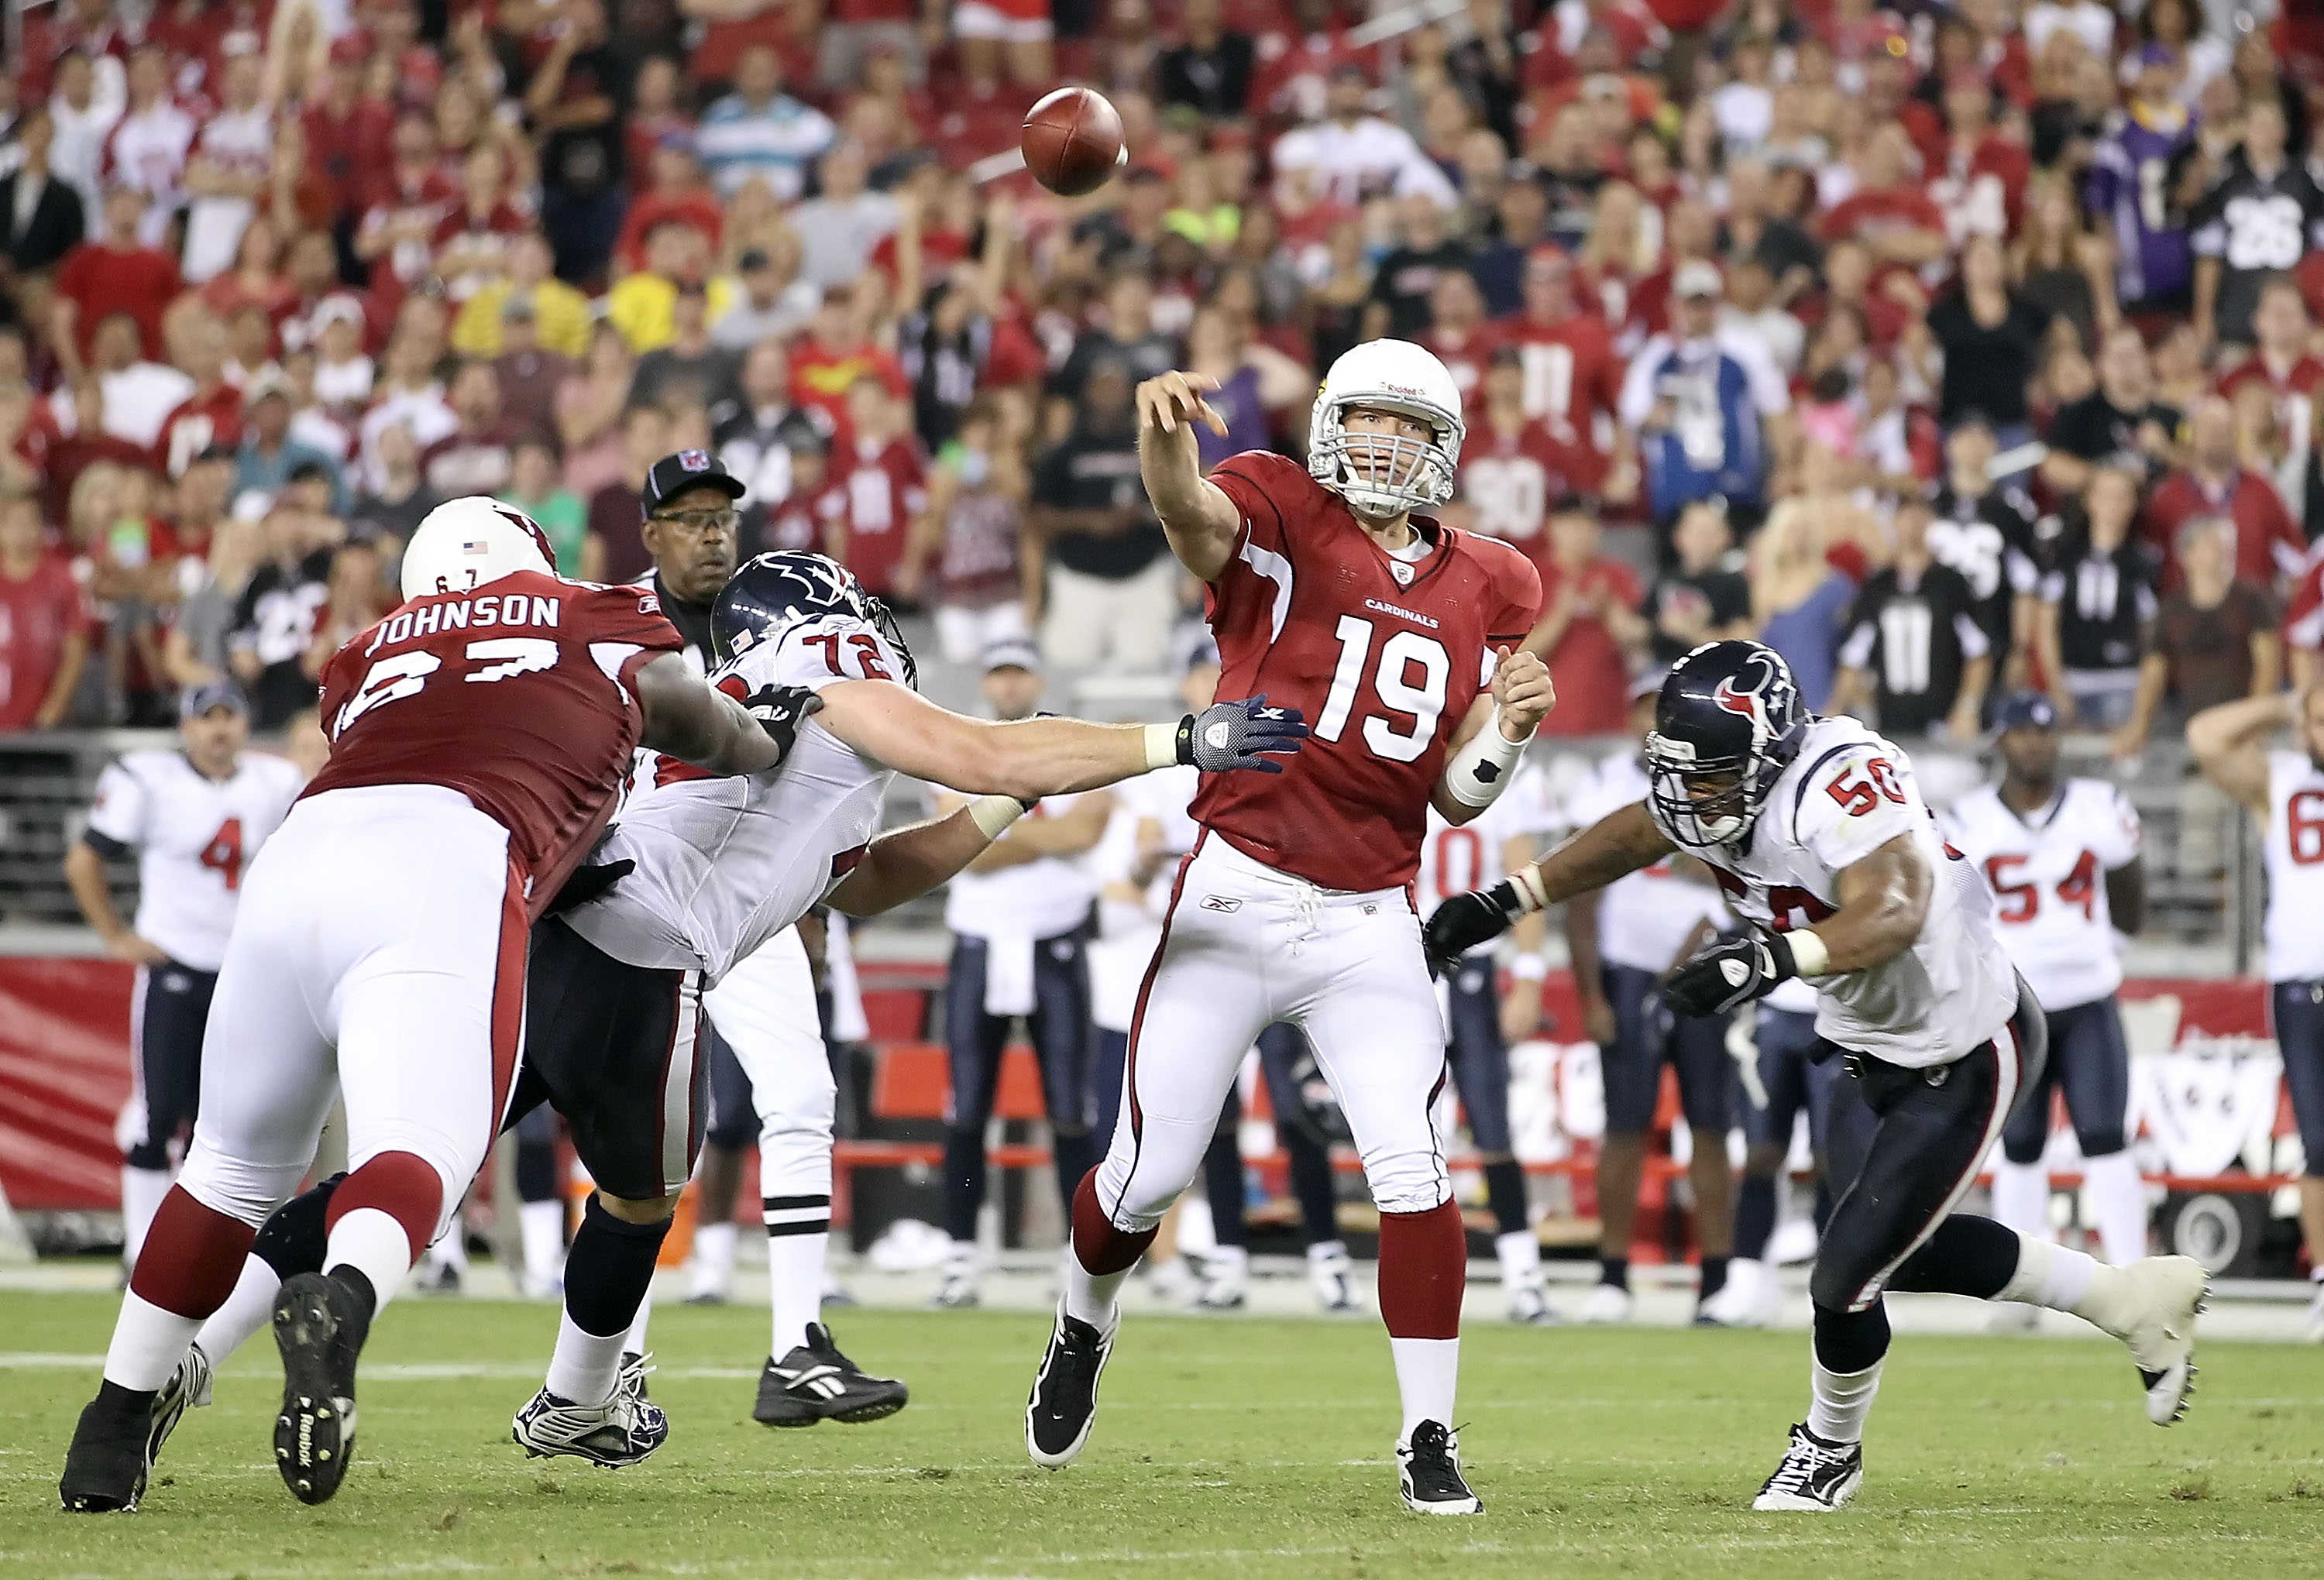 GLENDALE, AZ - AUGUST 14:  Quarterback John Skelton #19 of the Arizona Cardinals throws a pass under pressure from Shelley Smith #72 and Darnell Bing #50 of the Houston Texans during preseason NFL game at the University of Phoenix Stadium on August 14, 20